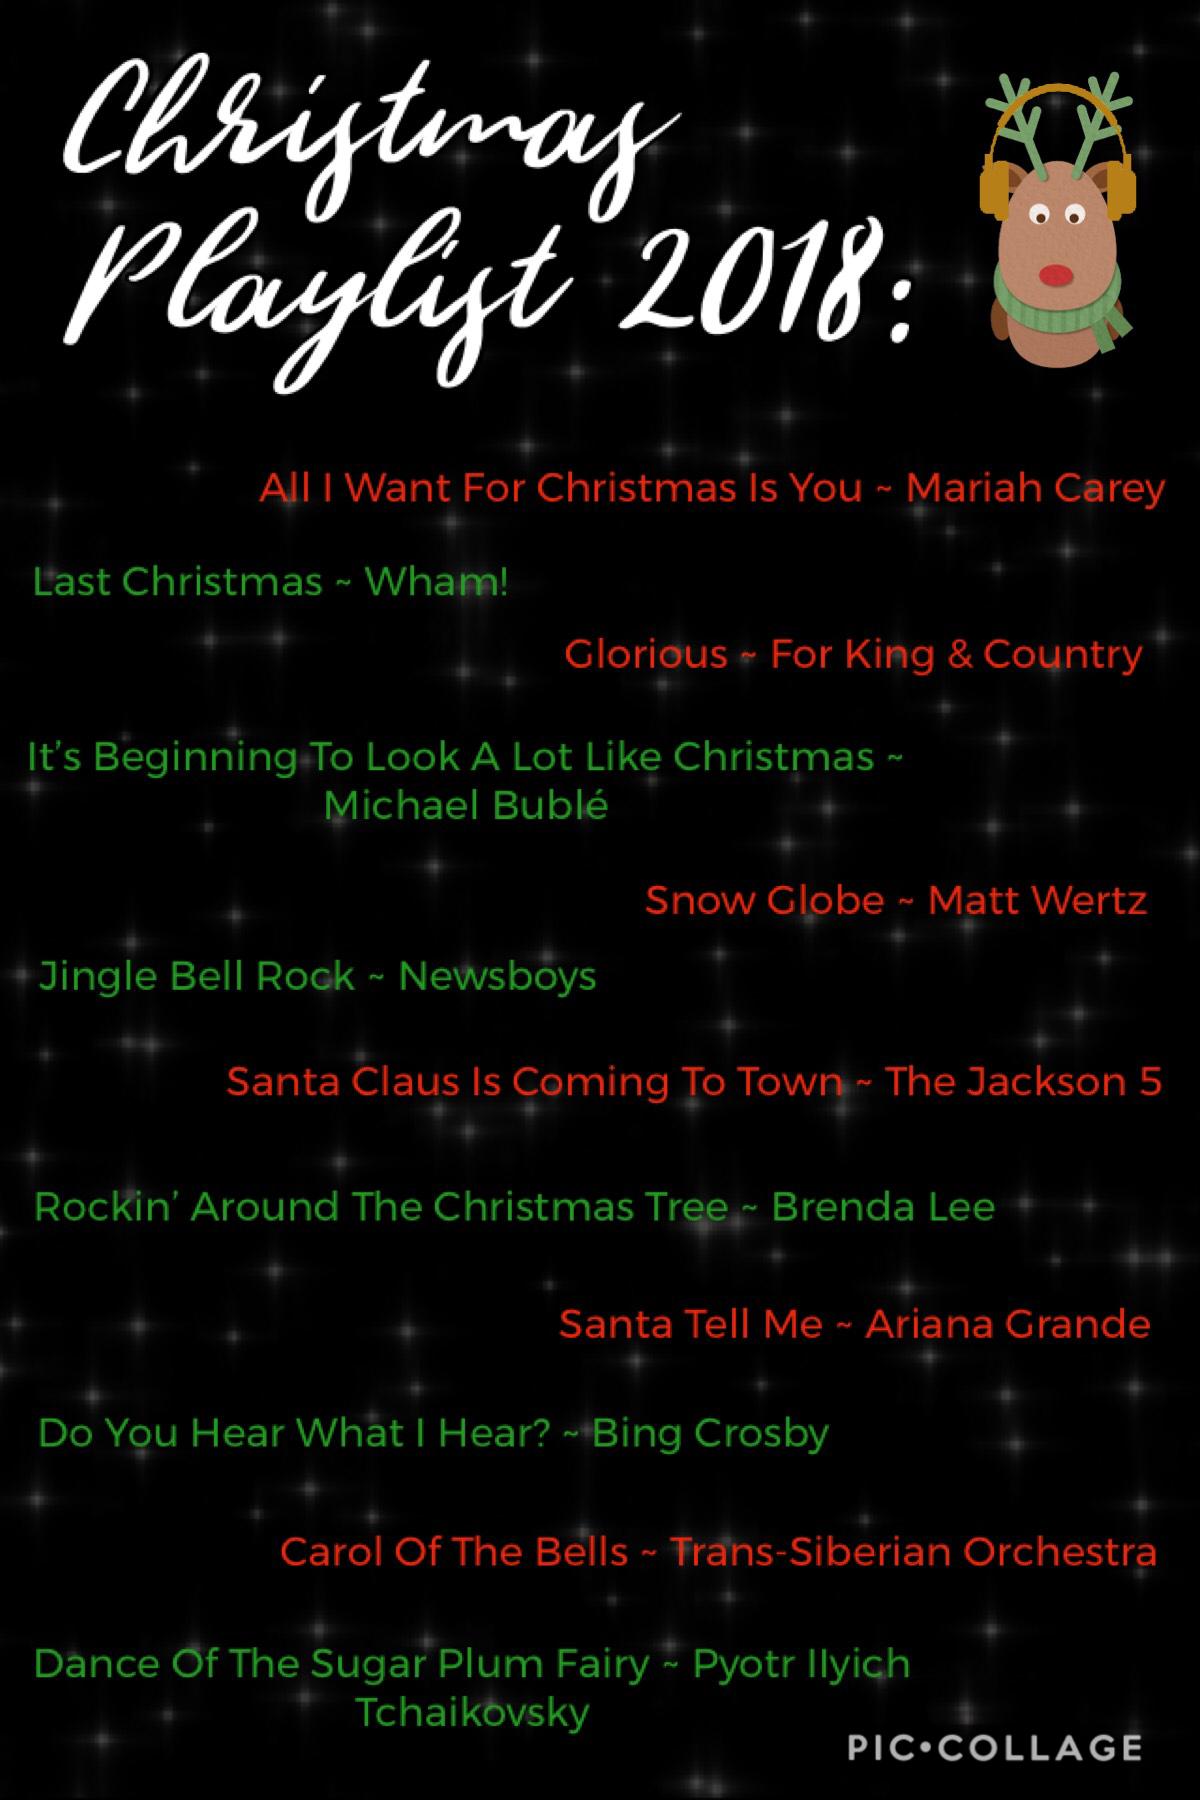 I’ve had most of these songs on repeat this month, so I thought I’d share them since I didn’t post a playlist last year! 🎧 🦌 🗓 I would’ve posted it sooner but I’ve been pretty busy, I’m trying to enjoy Christmas irl even tho I’d love to catch up here... 🎄